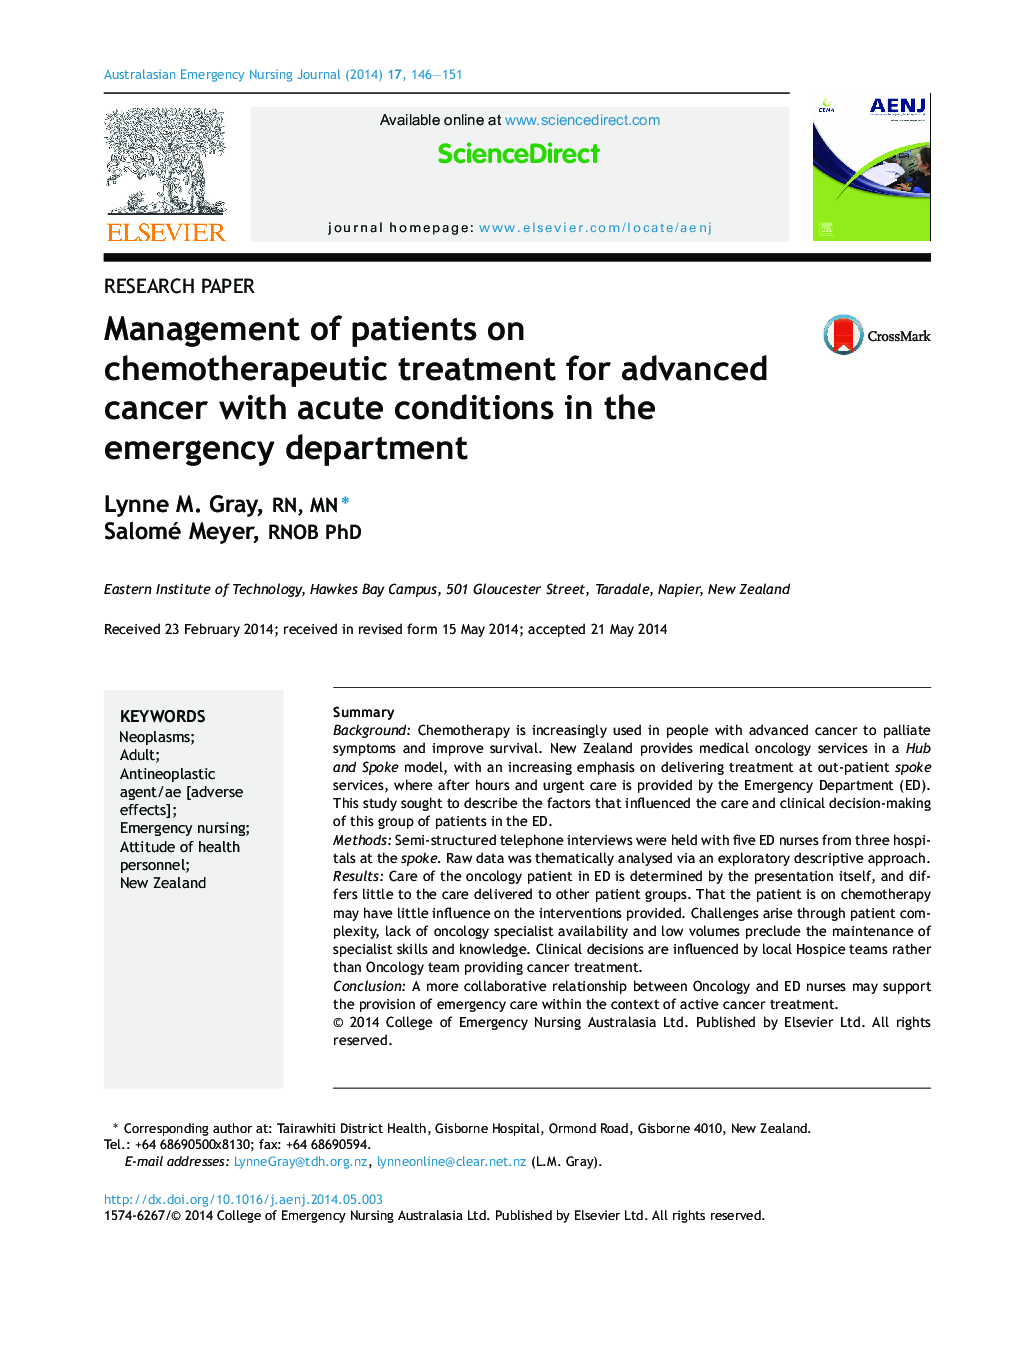 Management of patients on chemotherapeutic treatment for advanced cancer with acute conditions in the emergency department